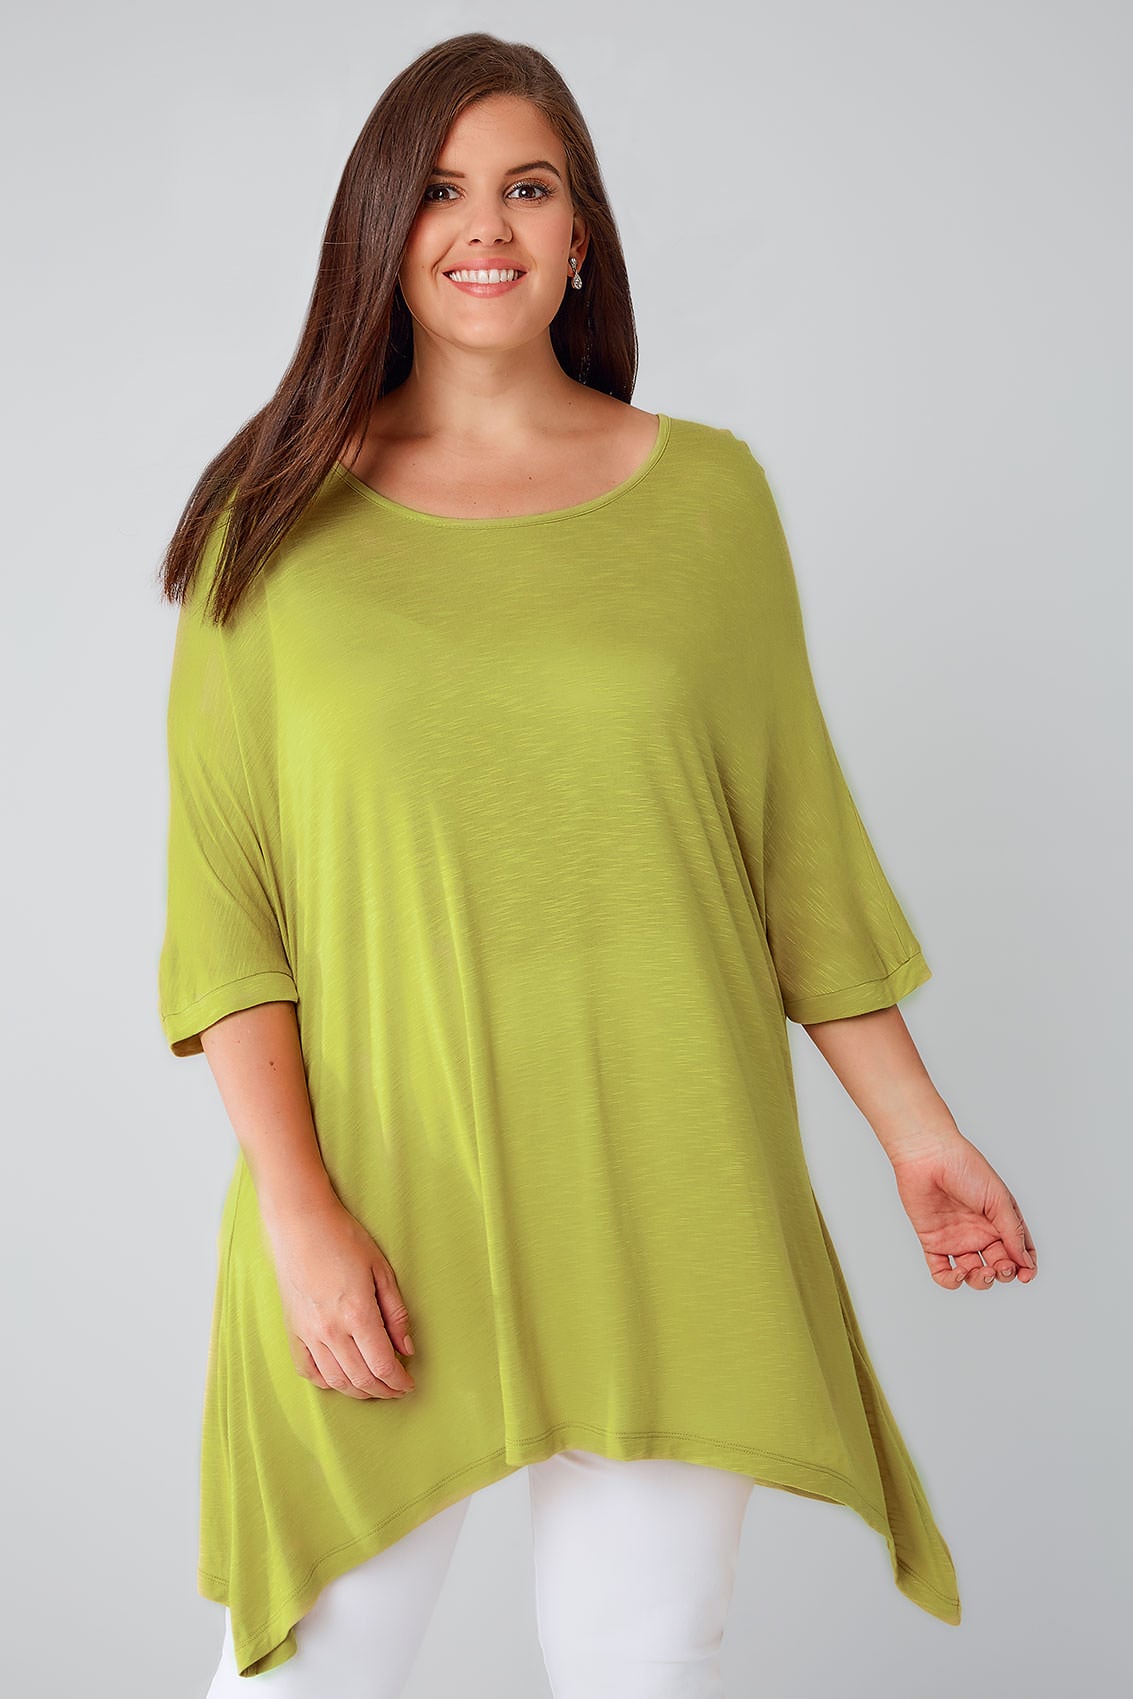 Chartreuse Green Oversized Soft Textured Jersey Top With Grown On Sleeves